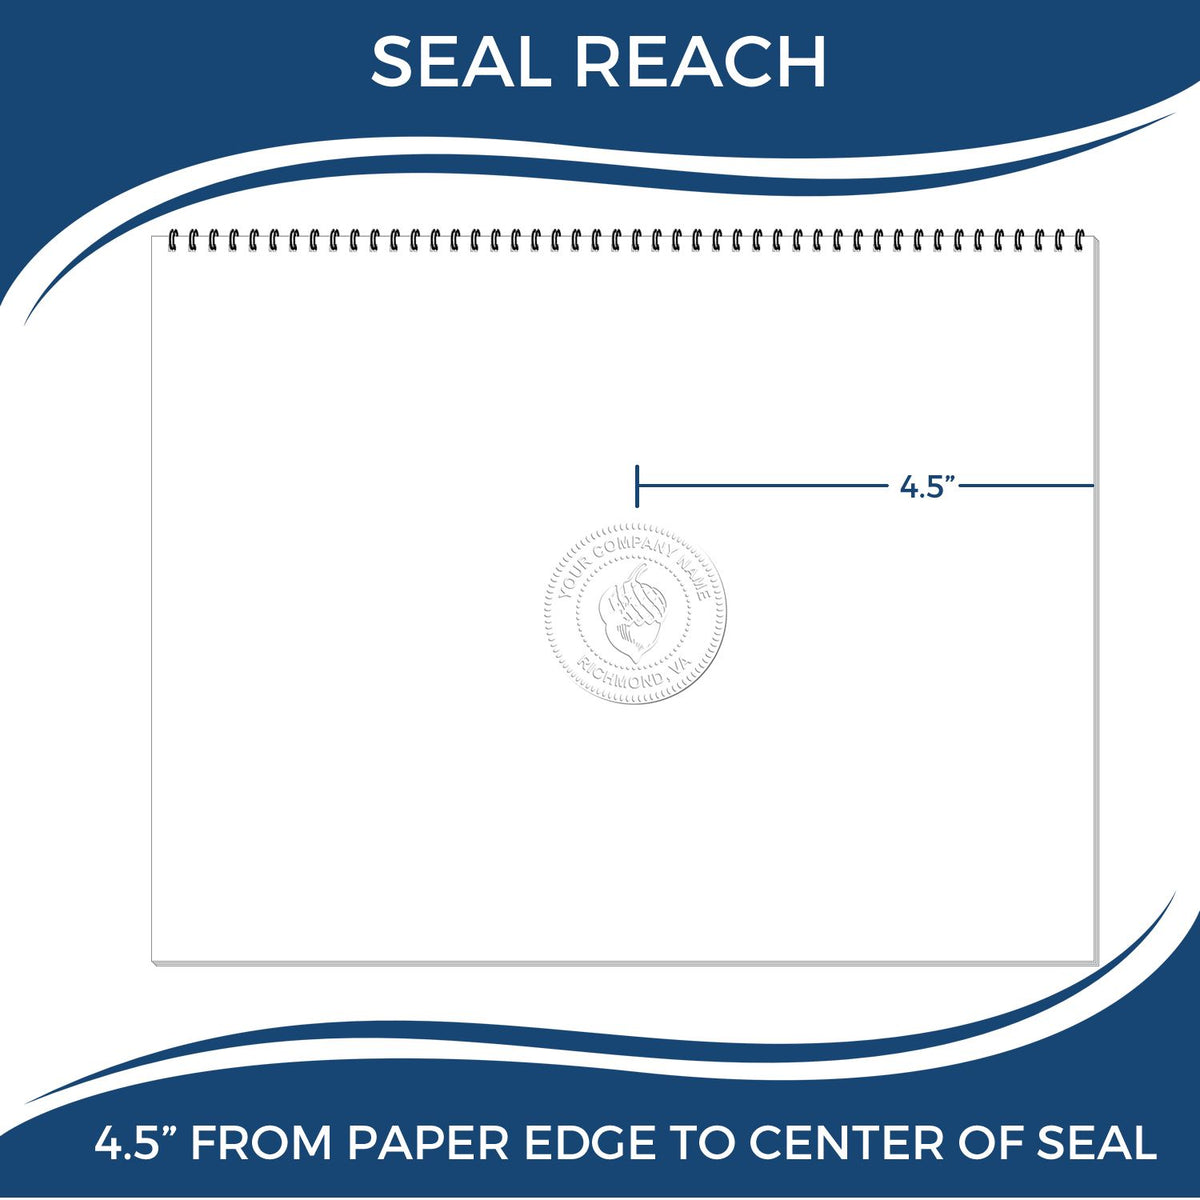 An infographic showing the seal reach which is represented by a ruler and a miniature seal image of the State of Alaska Extended Long Reach Geologist Seal